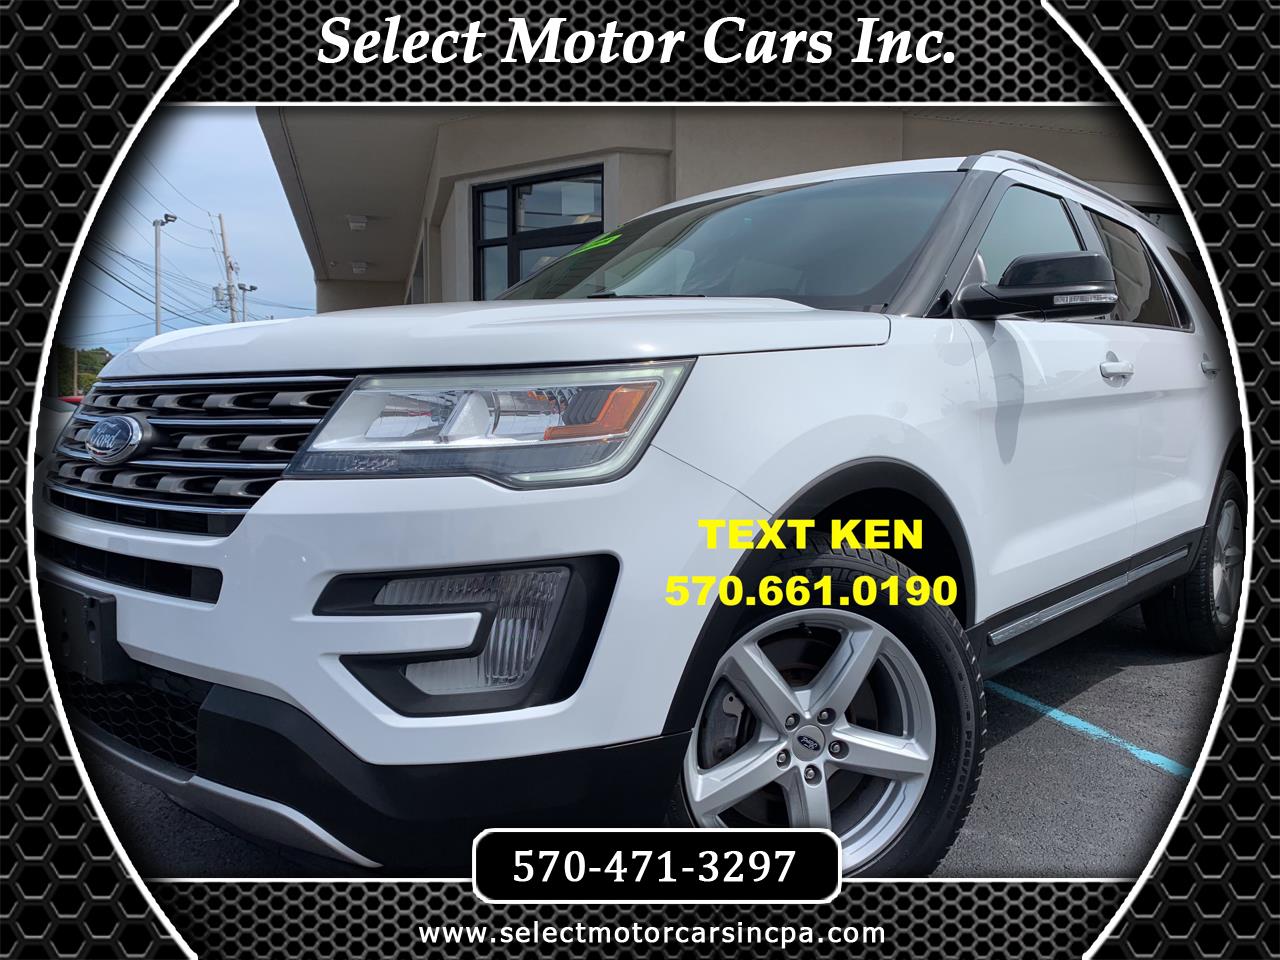 Used 2016 Ford Explorer Xlt 4wd For Sale In Moosic Pa 18507